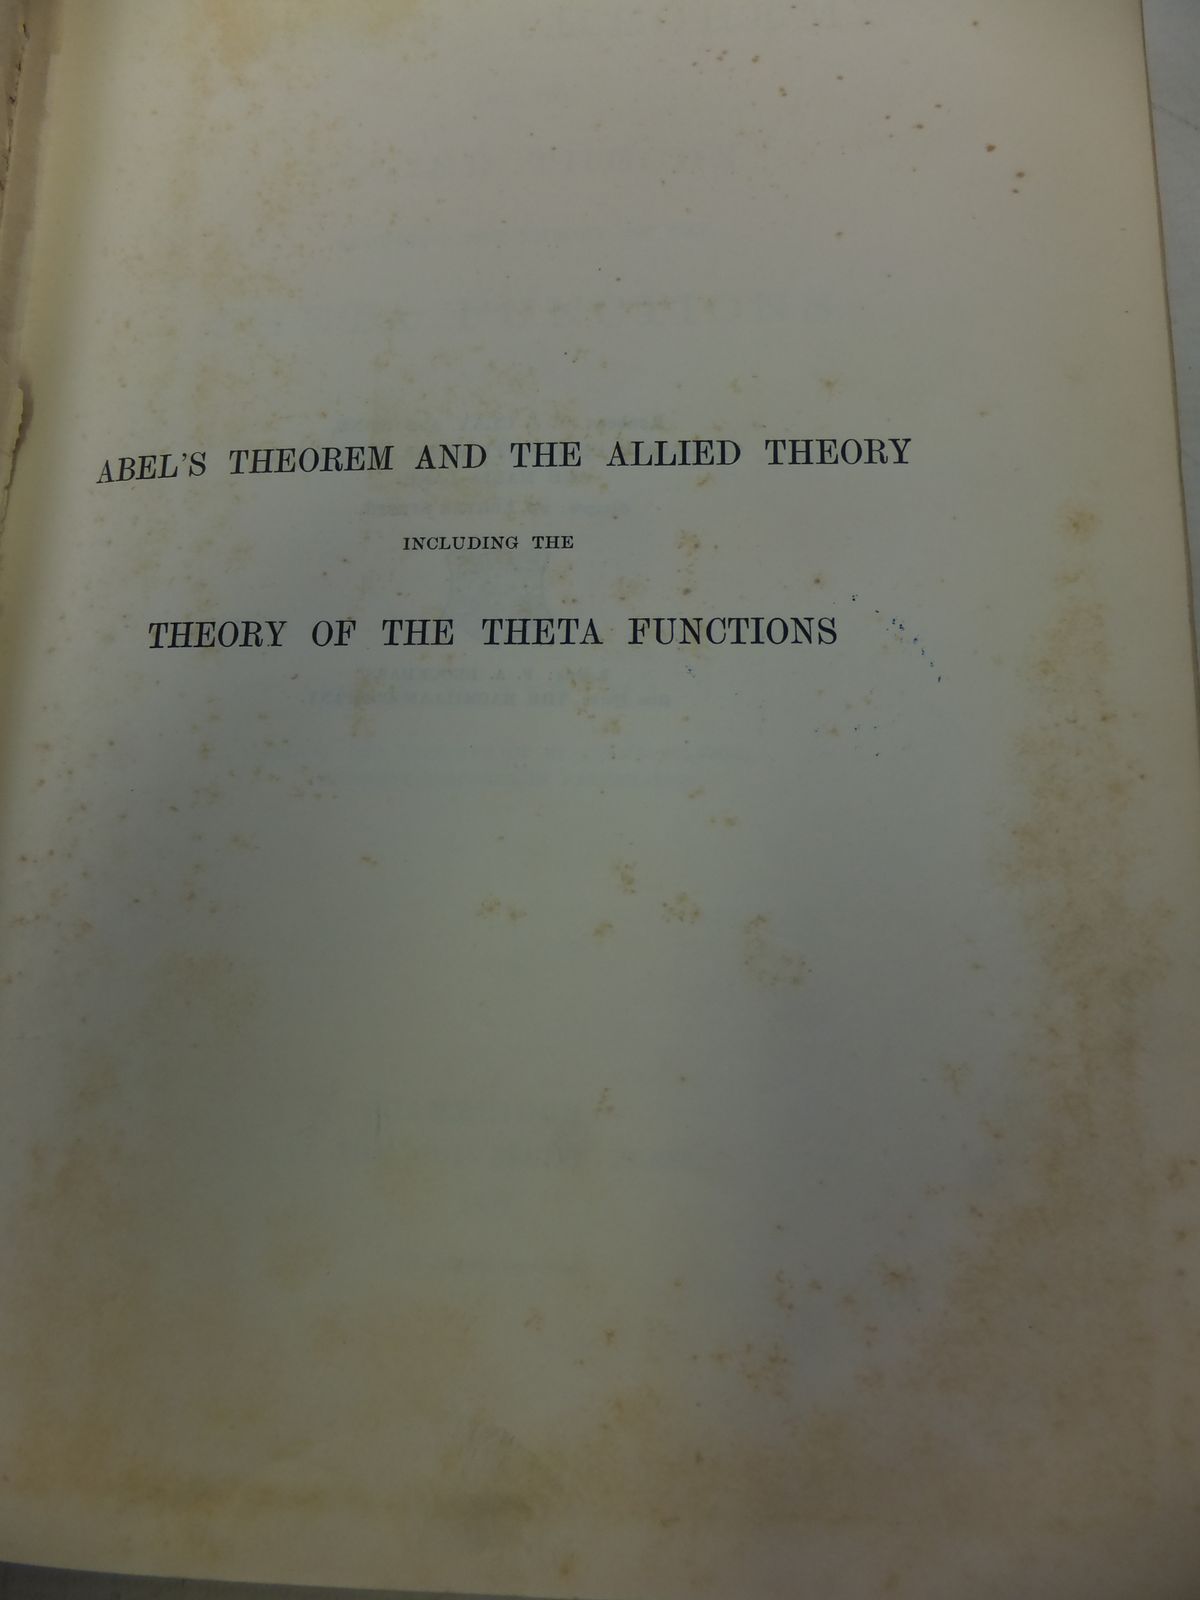 Photo of ABEL'S THEOREM AND THE ALLIED THEORY INCLUDING THE THEORY OF THE THETA FUNCTIONS written by Baker, H.F. published by Cambridge University Press (STOCK CODE: 1811328)  for sale by Stella & Rose's Books